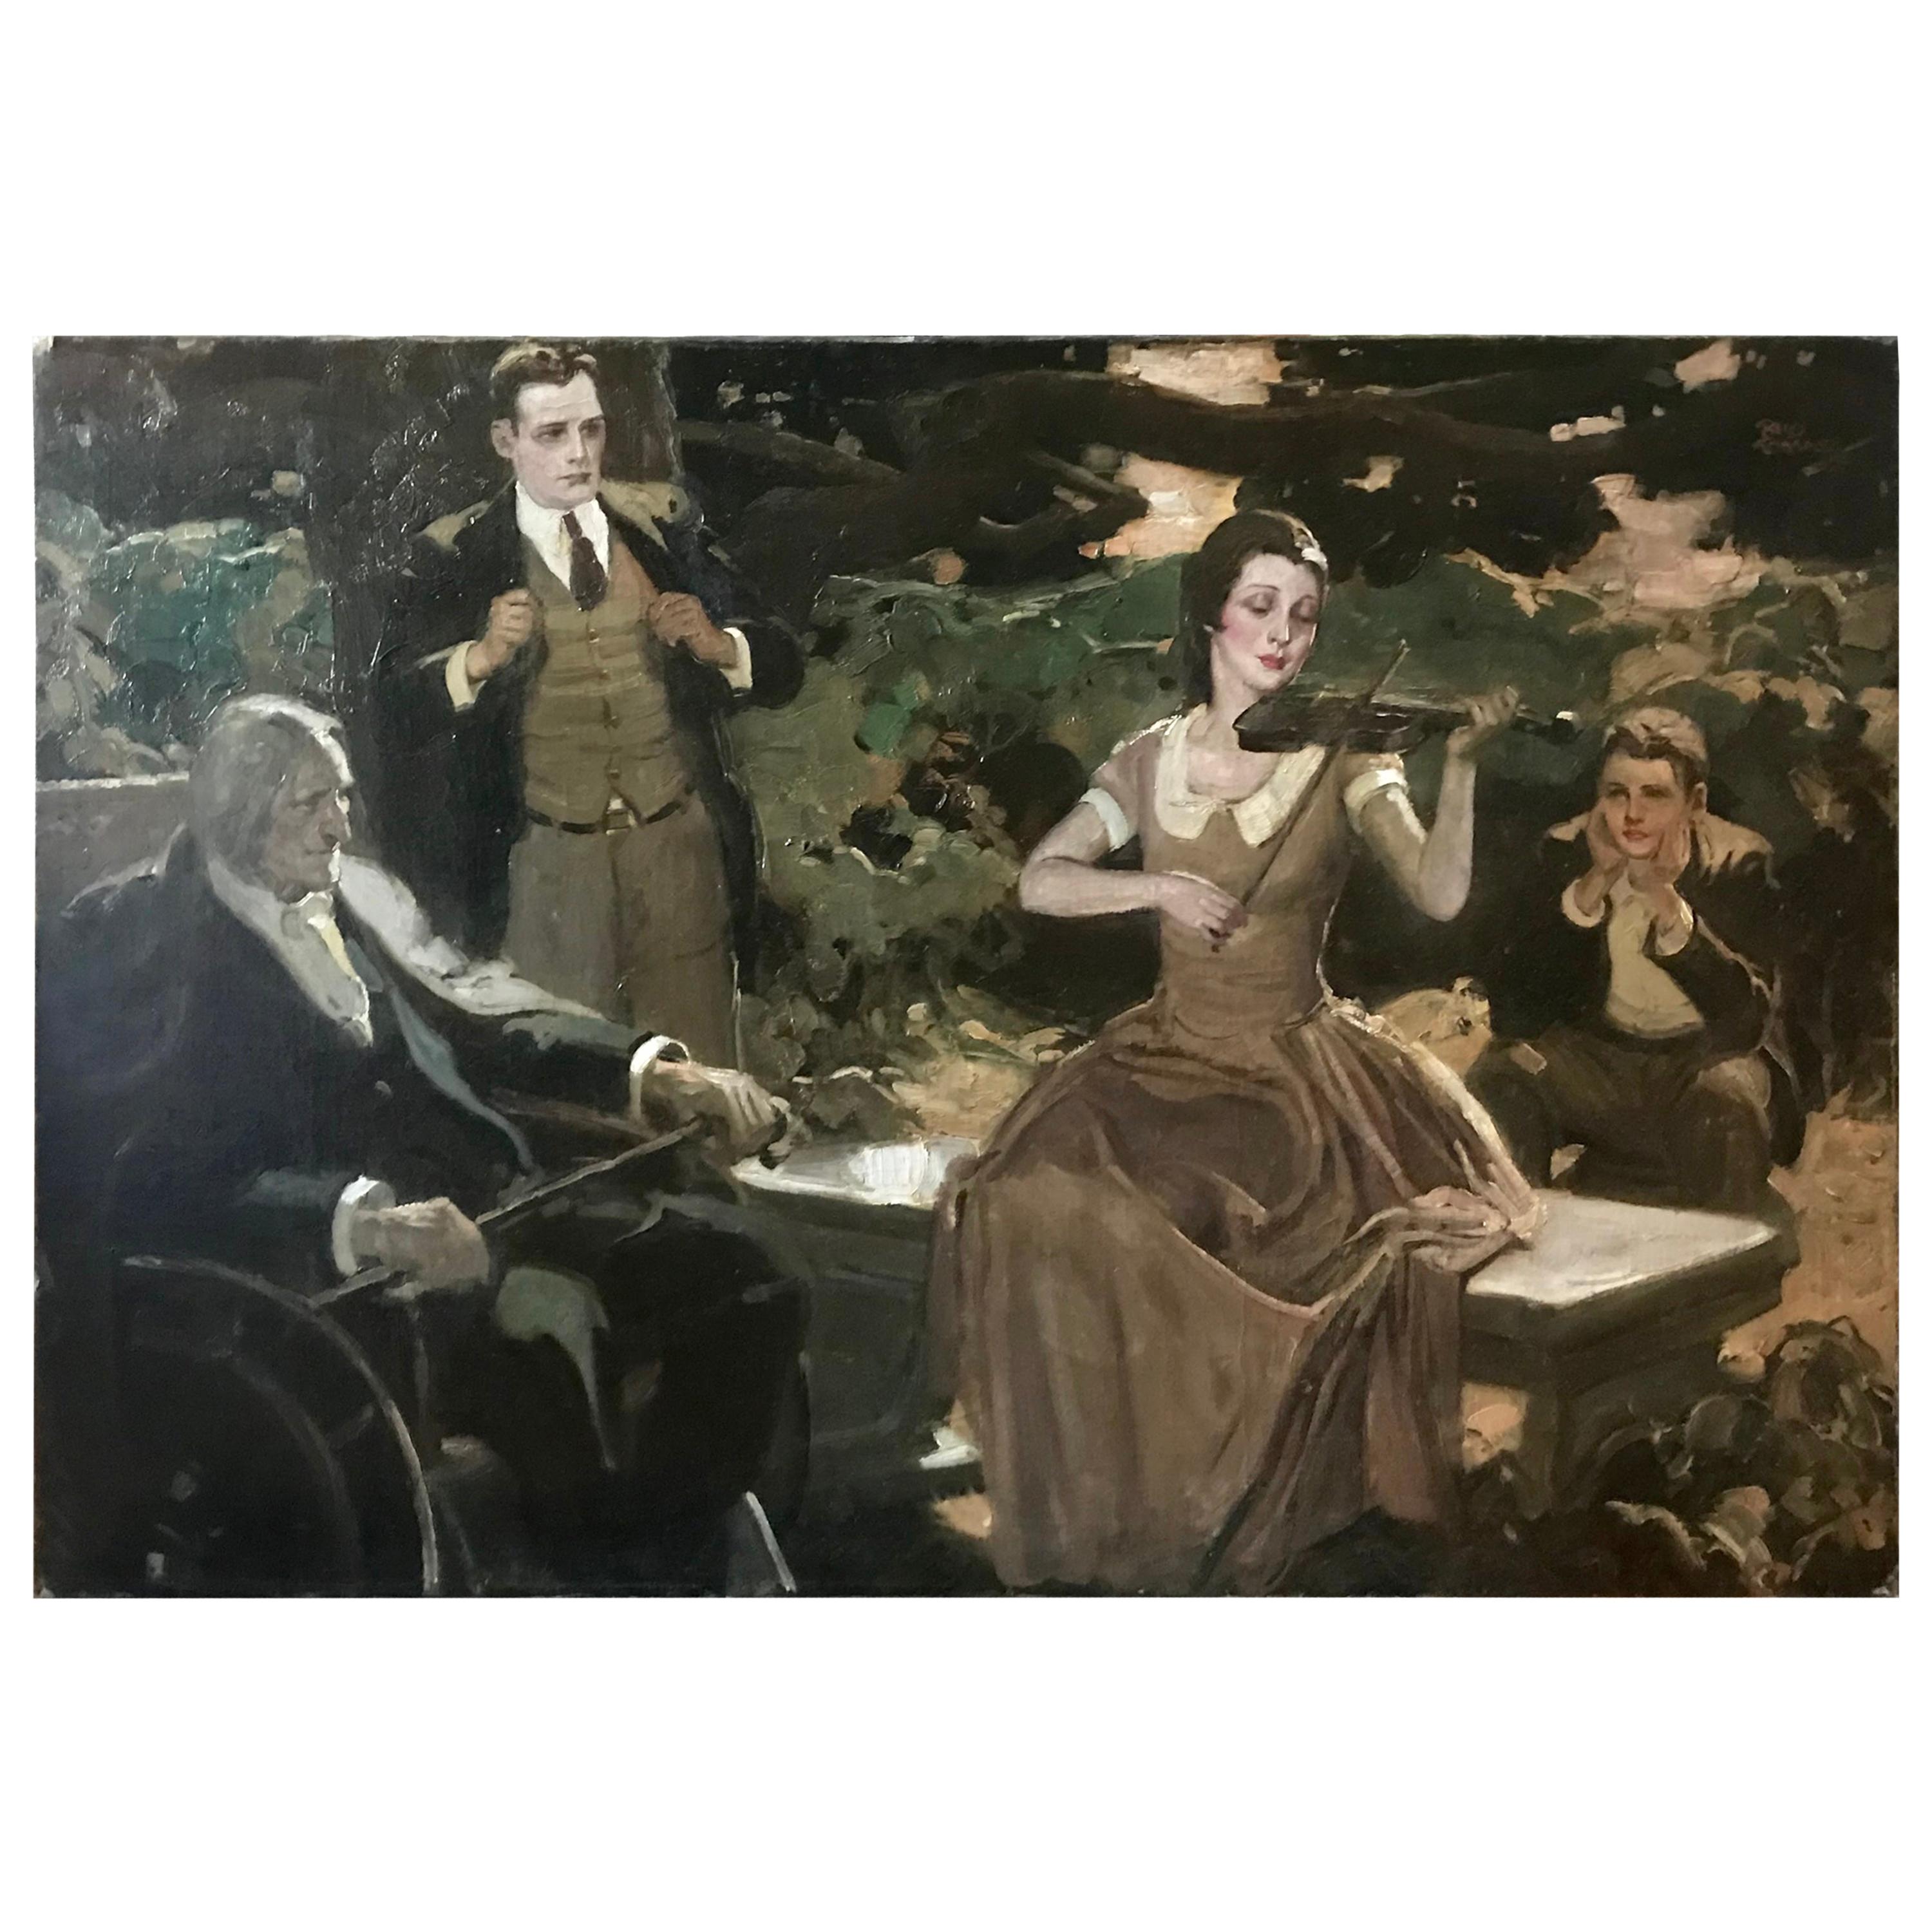 Rico Tomaso, "Woman Playing Violin, Men Enthralled" For Sale